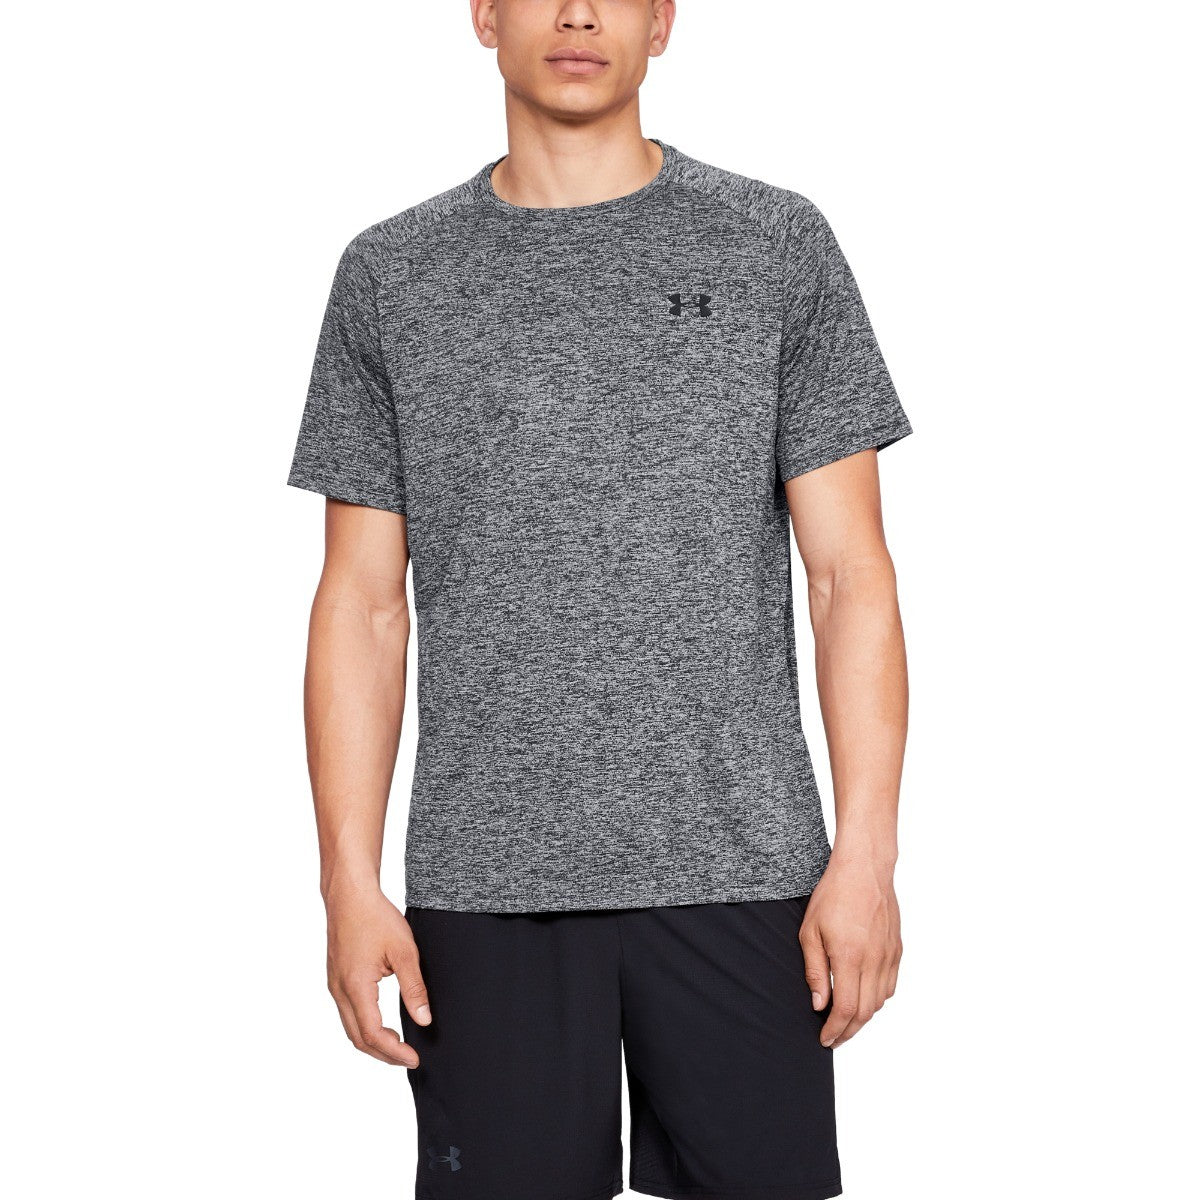 Se Under Armour Tech 2.0 SS Tee - Gray/Black hos Muscle House